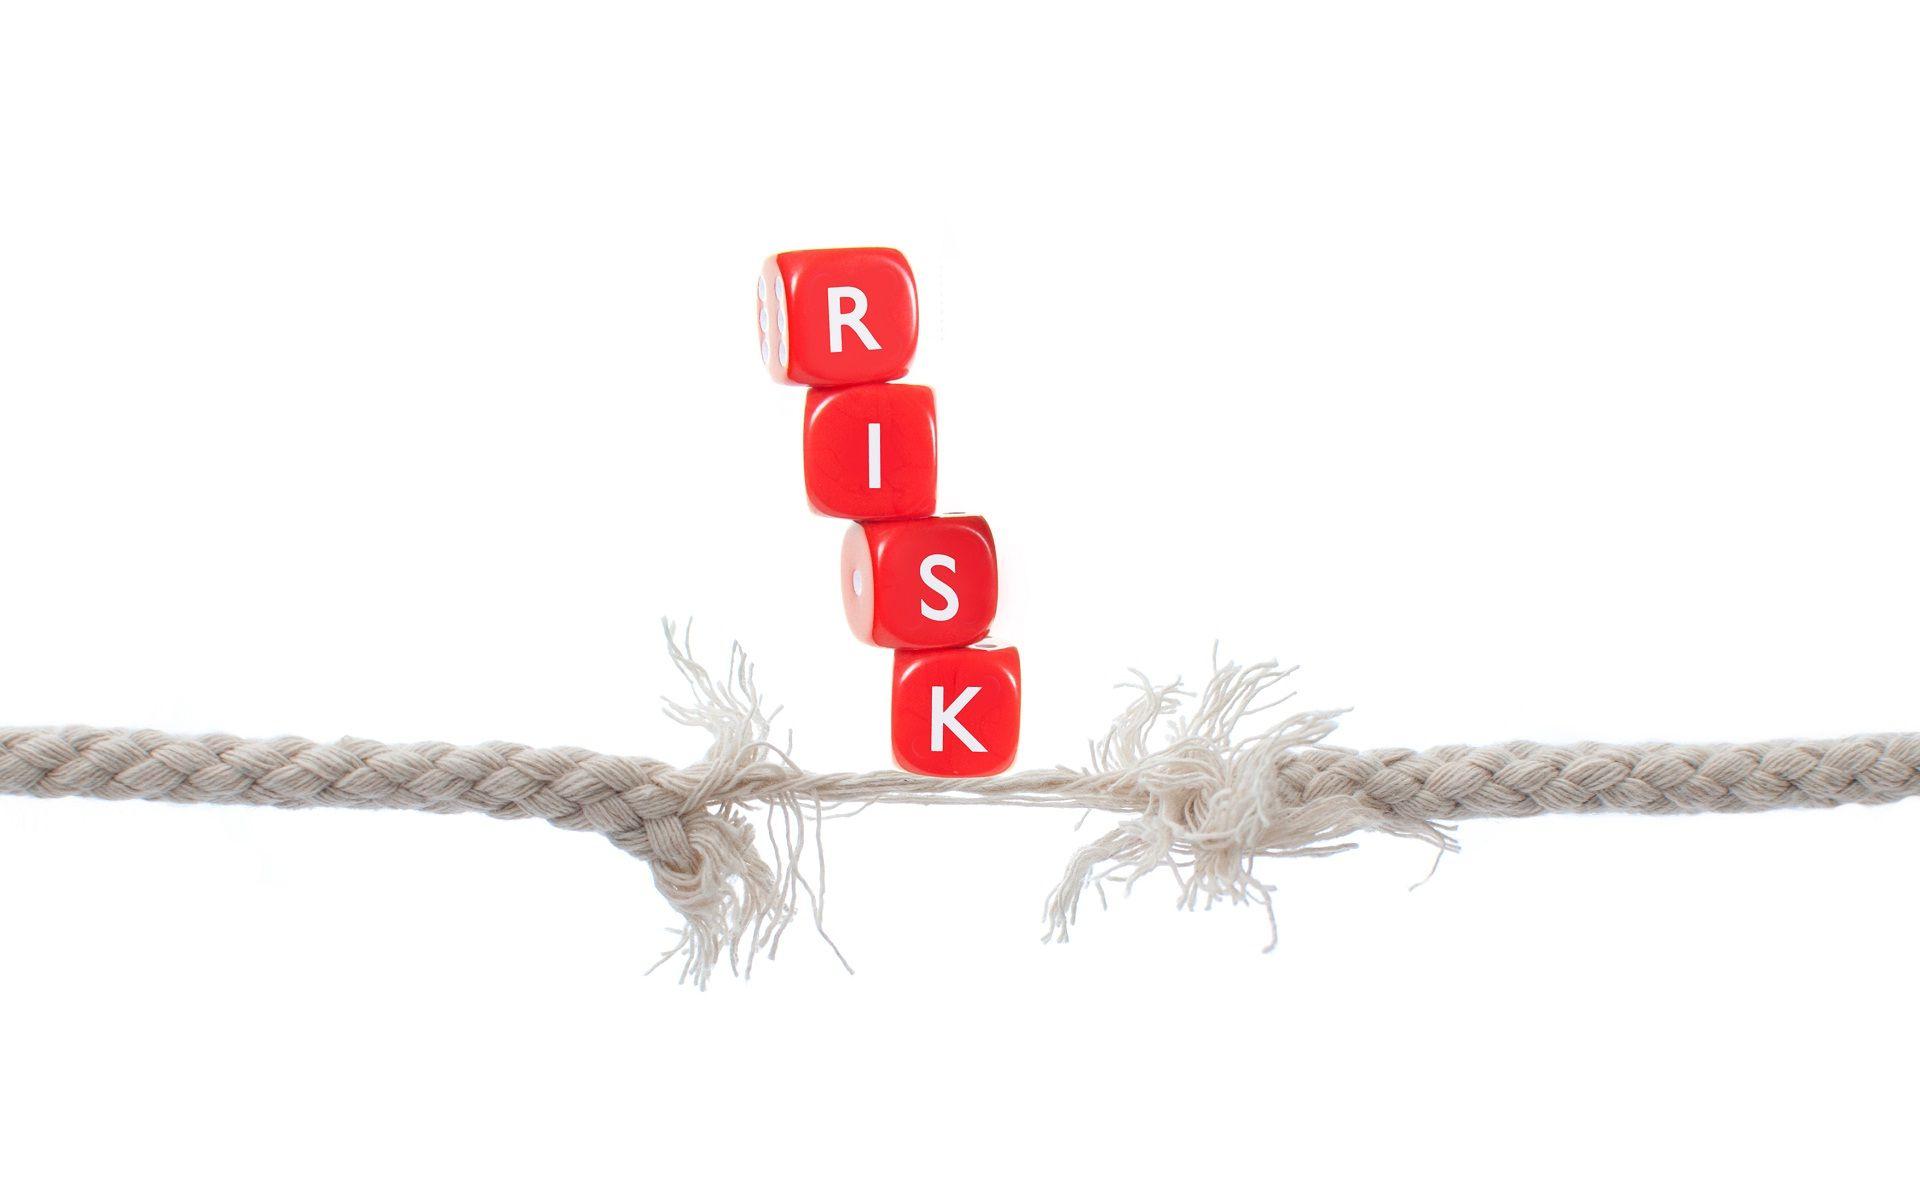 Risk for work nice motivational image and wallpaper. HD